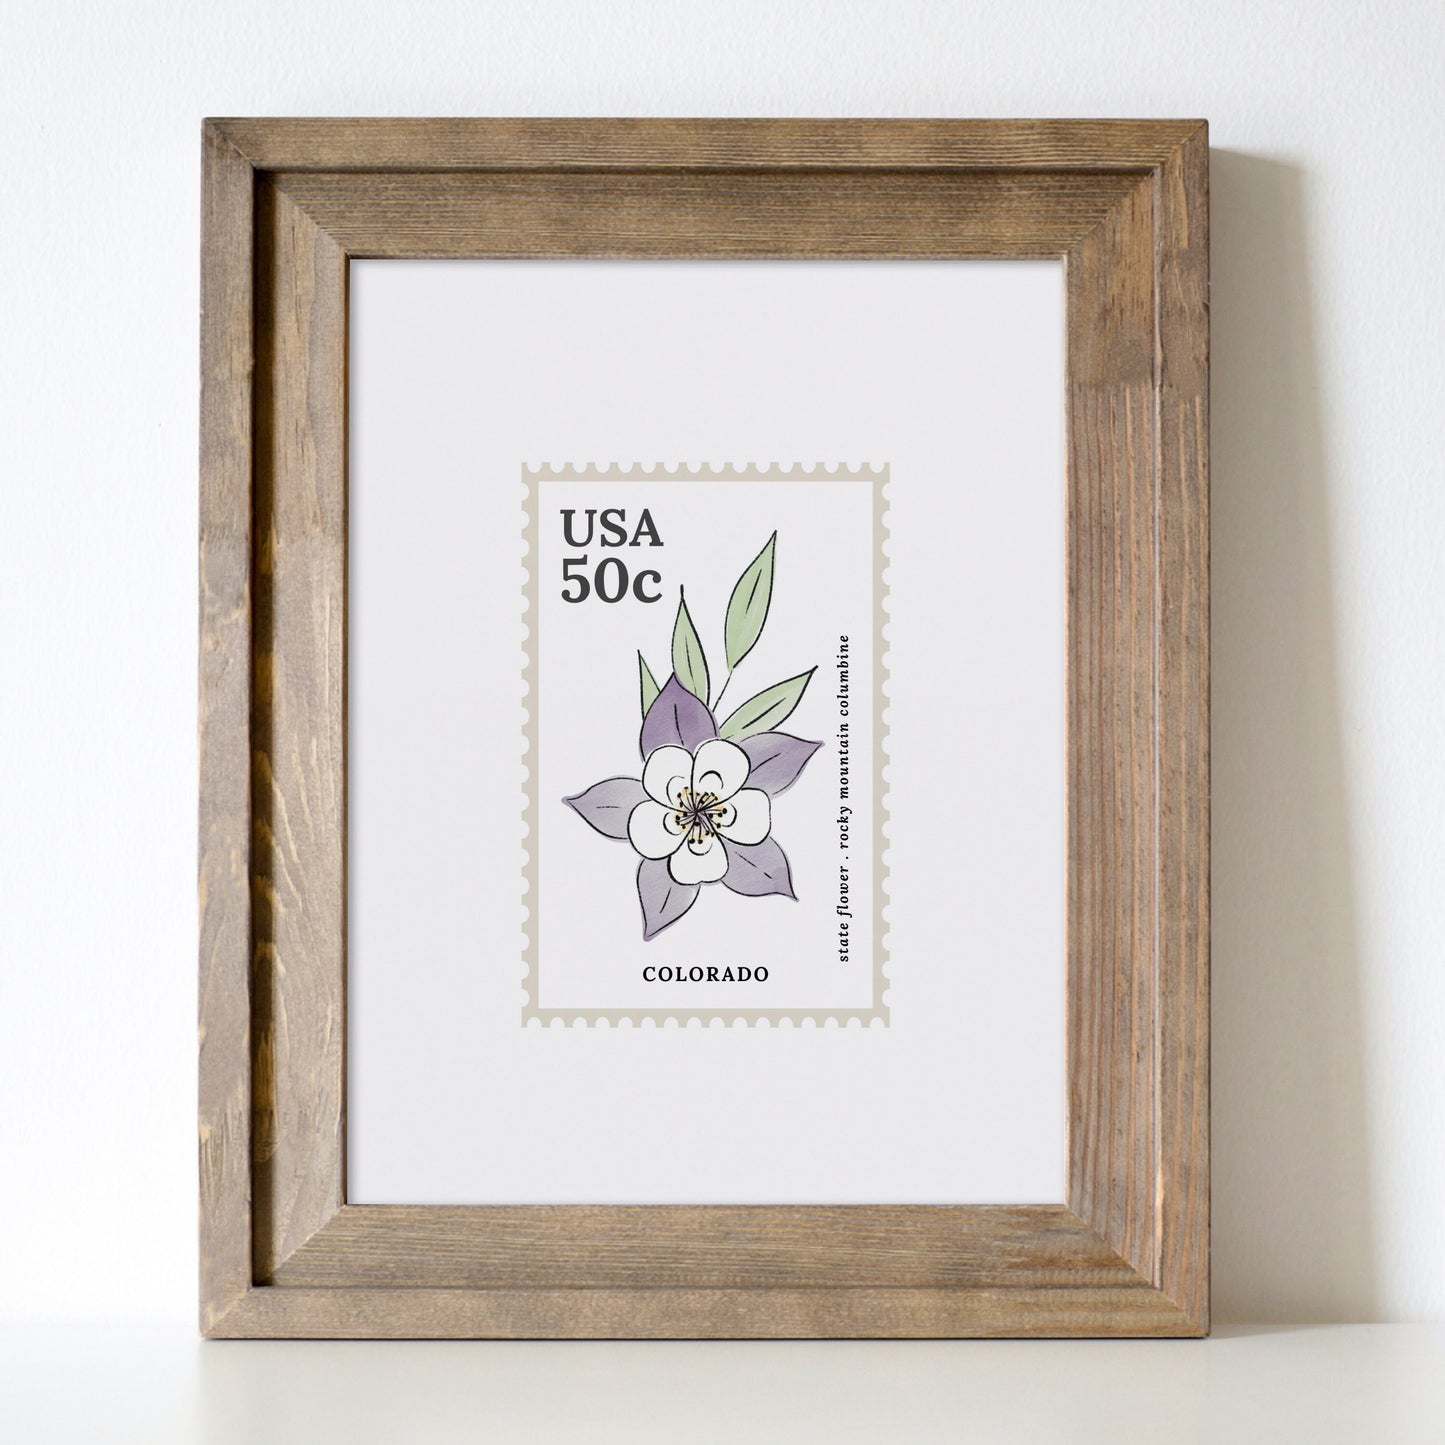 Colorado US State Flower Stamp | Rocky Mountain Columbine Watercolor Floral Art Printable